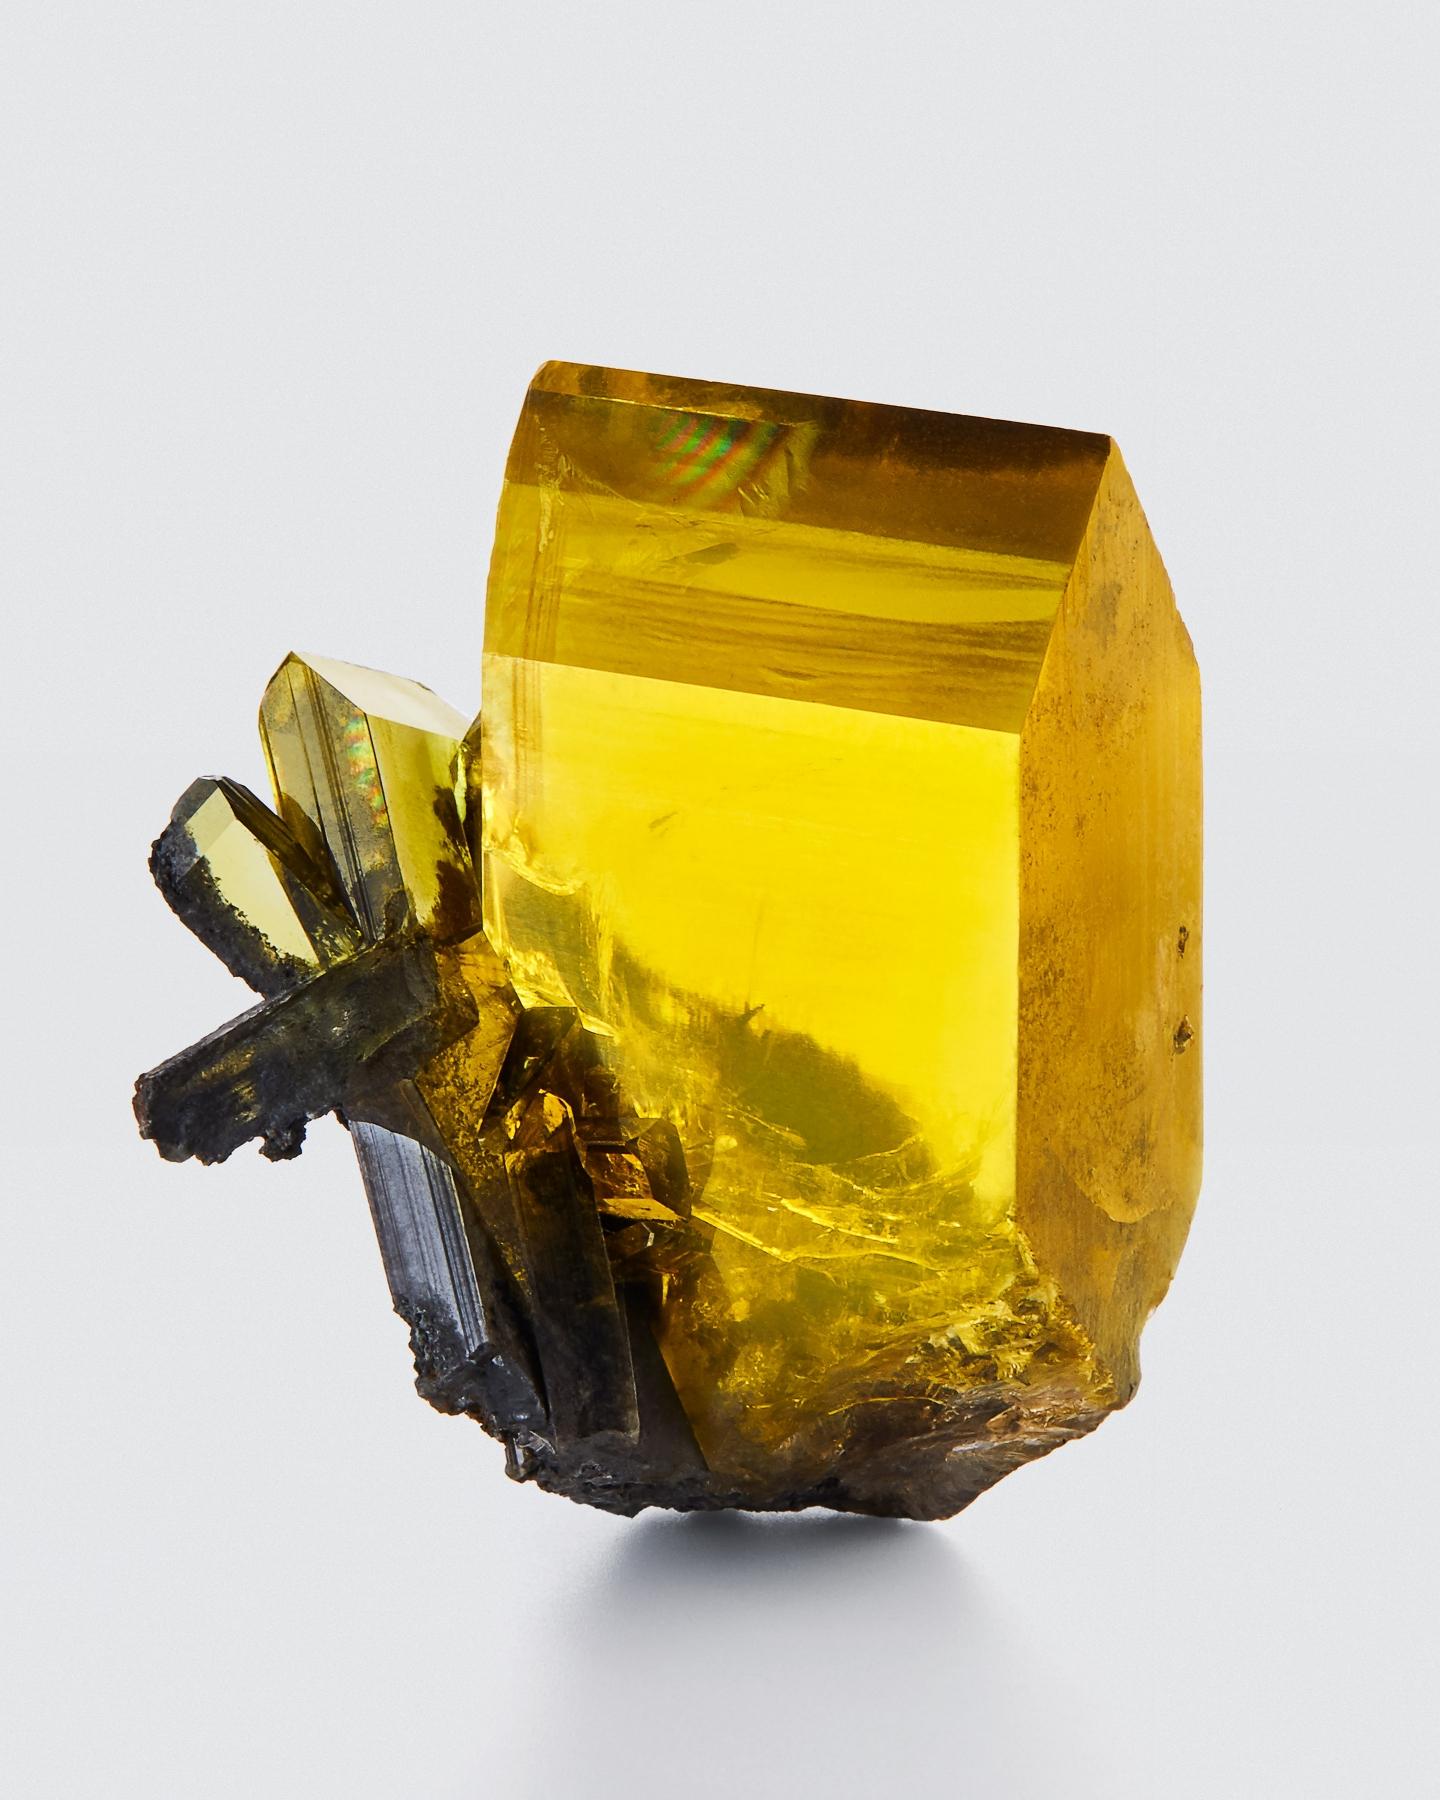 Anglesite

Touissit, Touissit-Bou Beker mining district, Jerada Province, Oriental Region, Morocco

Anglesite is among the rarest species to find in exceptional collector quality. The finest known examples were all discovered in Morocco during a